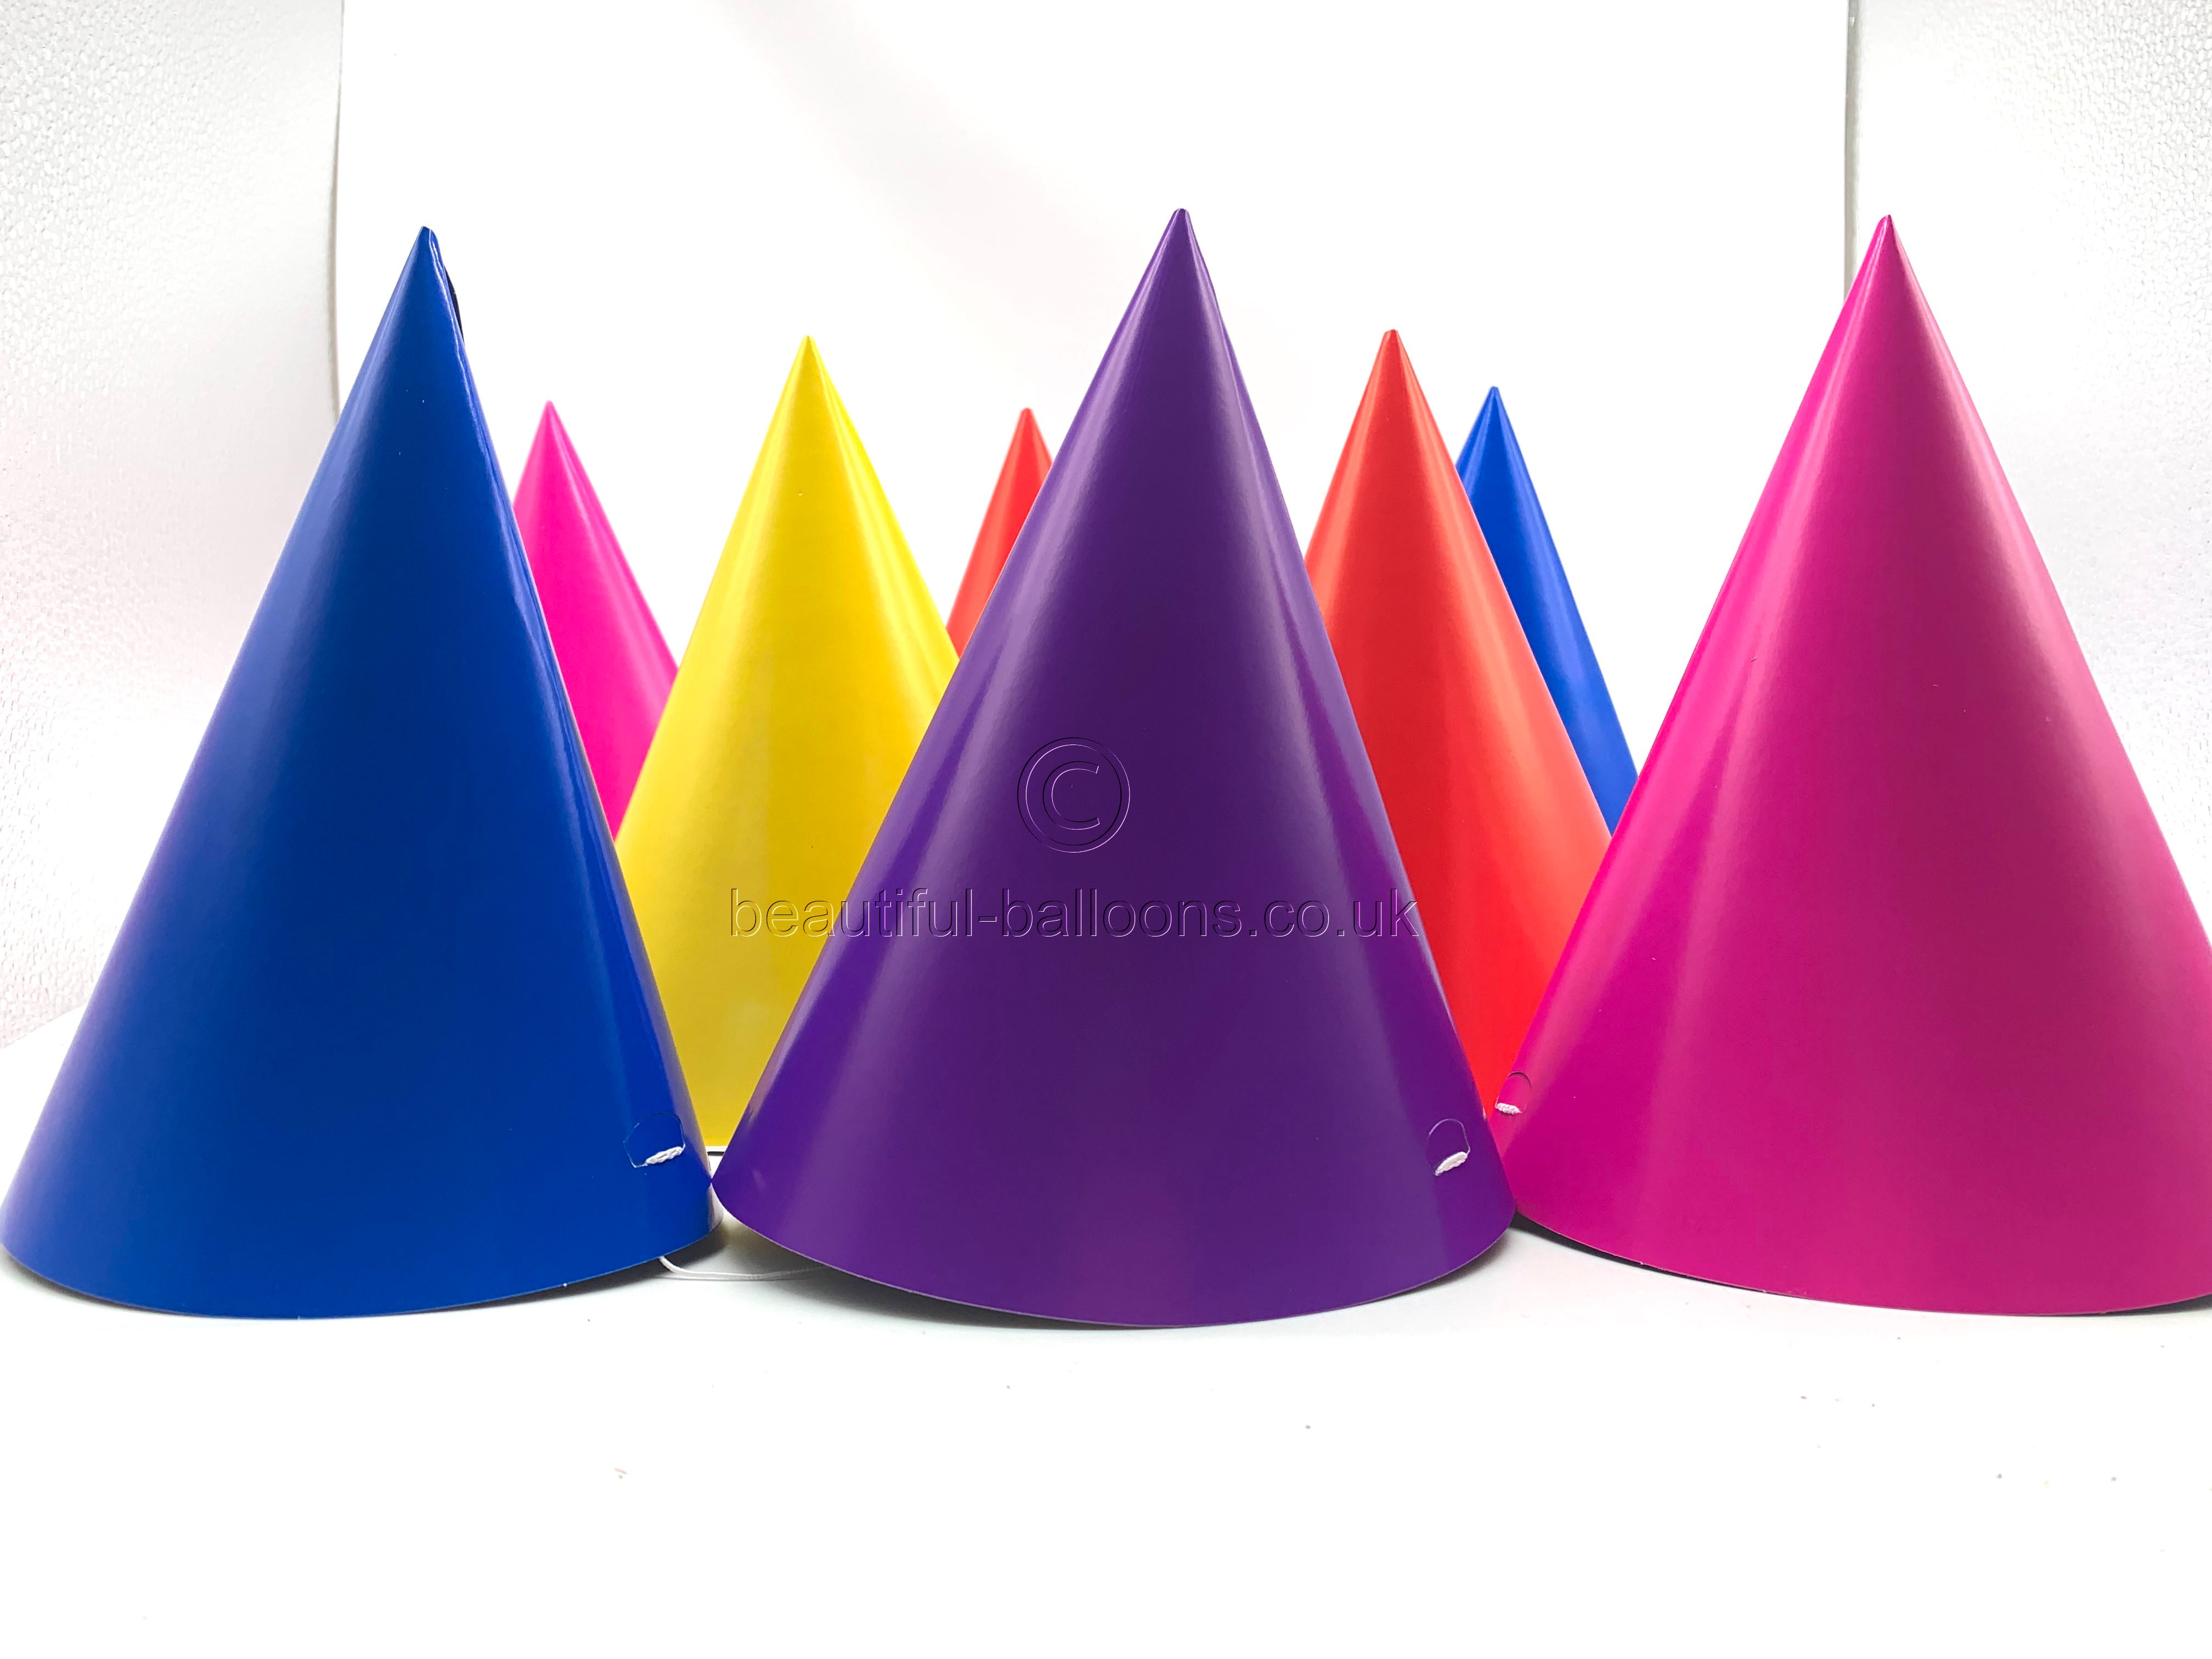 Tips Arbejdsløs regional Party Cone Hats – beautiful balloons